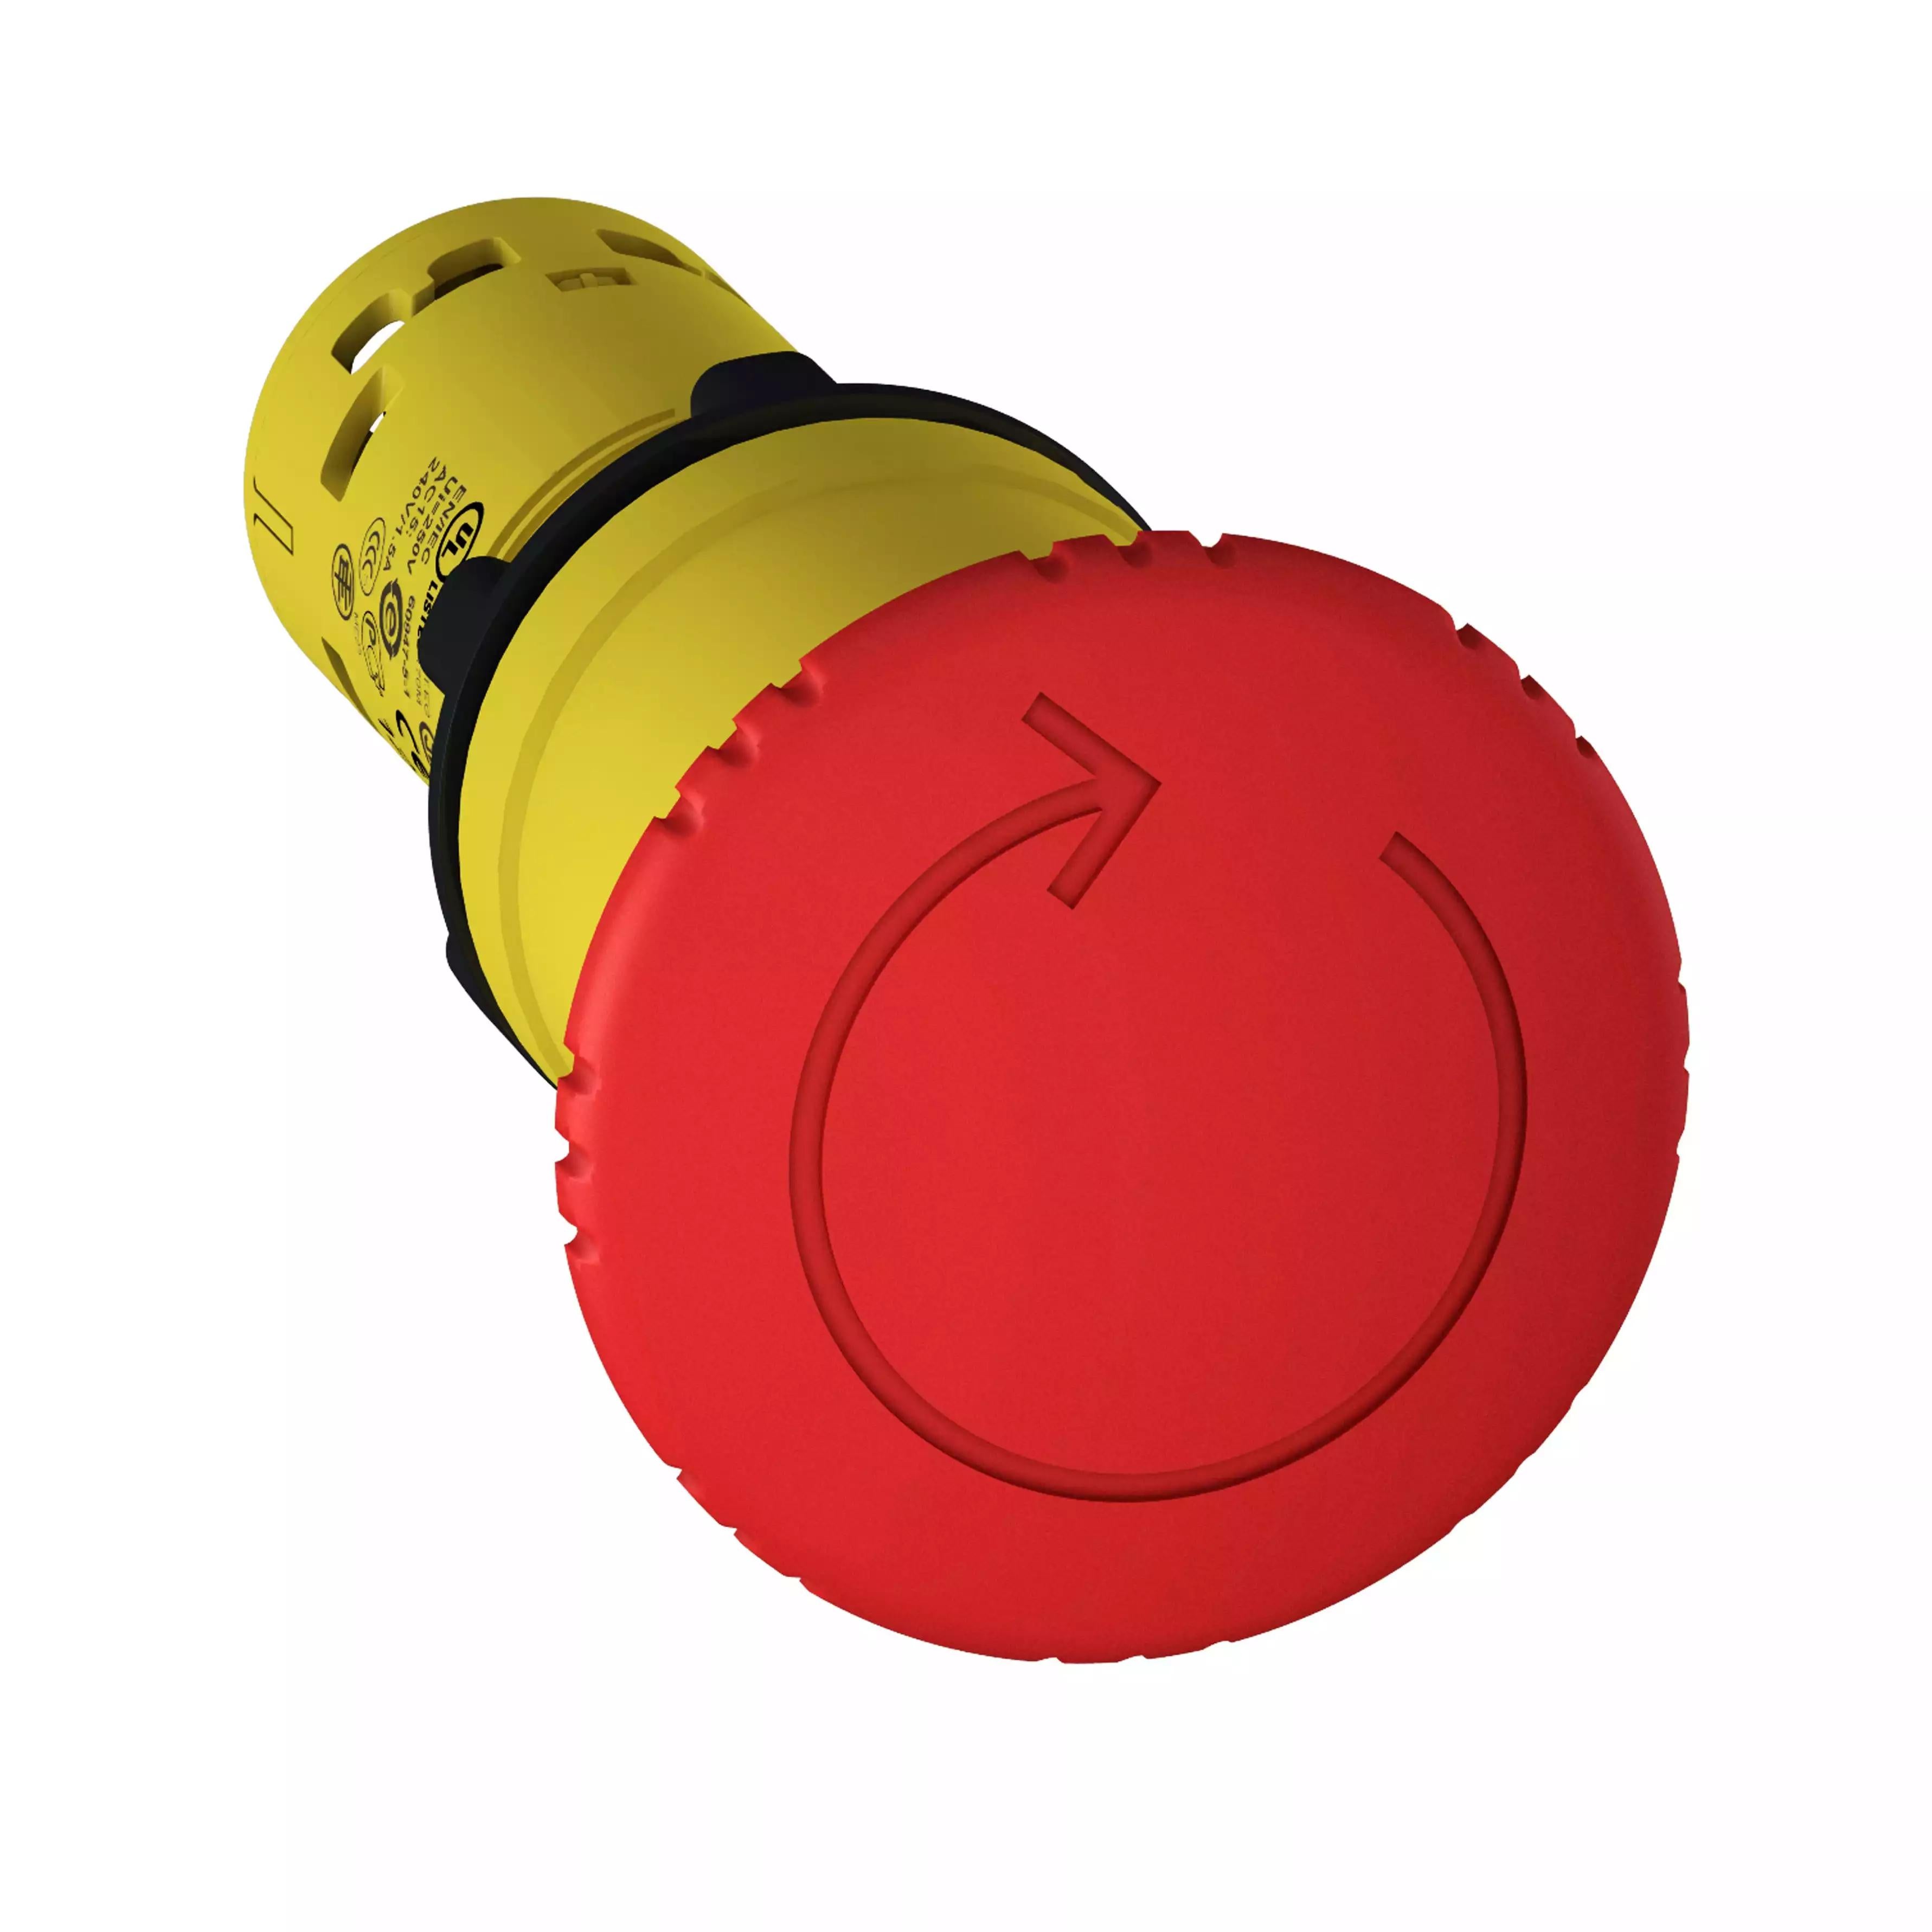 Monolithic emergency stop, Harmony XB7, plastic, red mushroom 40mm, 22mm, latching turn to release, 1NO+1NC